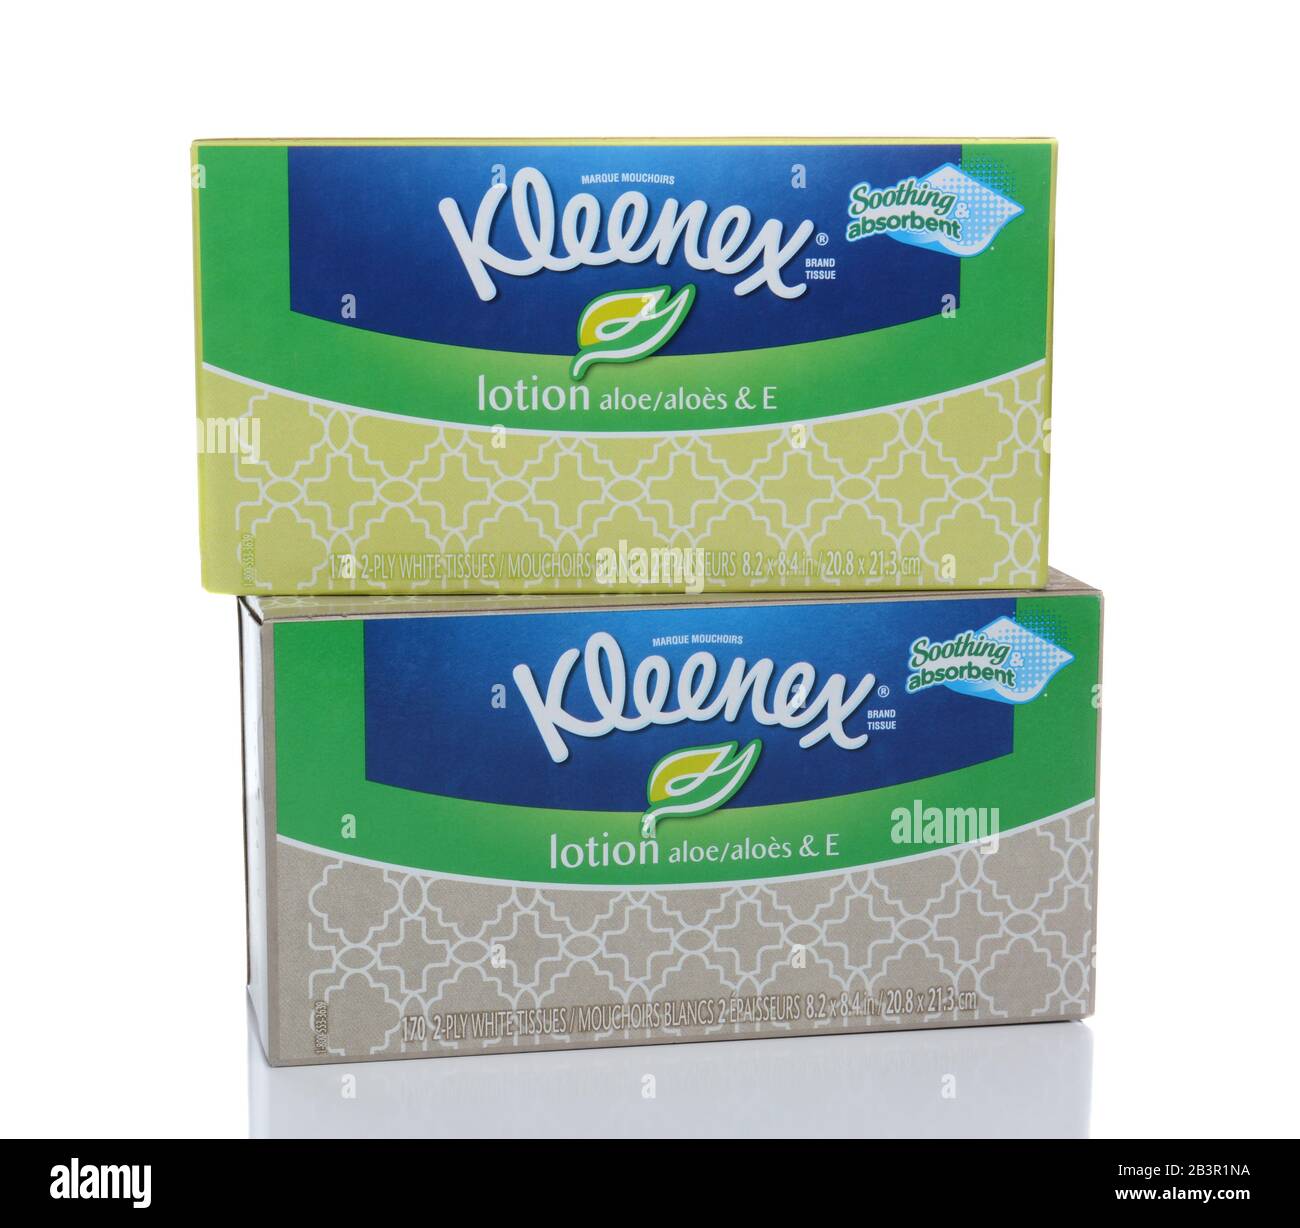 IRVINE, CA - FEBRUARY 19, 2015: Kleenex Tissues with Lotion. Kleenex is a  trademark of Kimberly-Clark Worldwide, Inc. They make a variety of paper pr  Stock Photo - Alamy